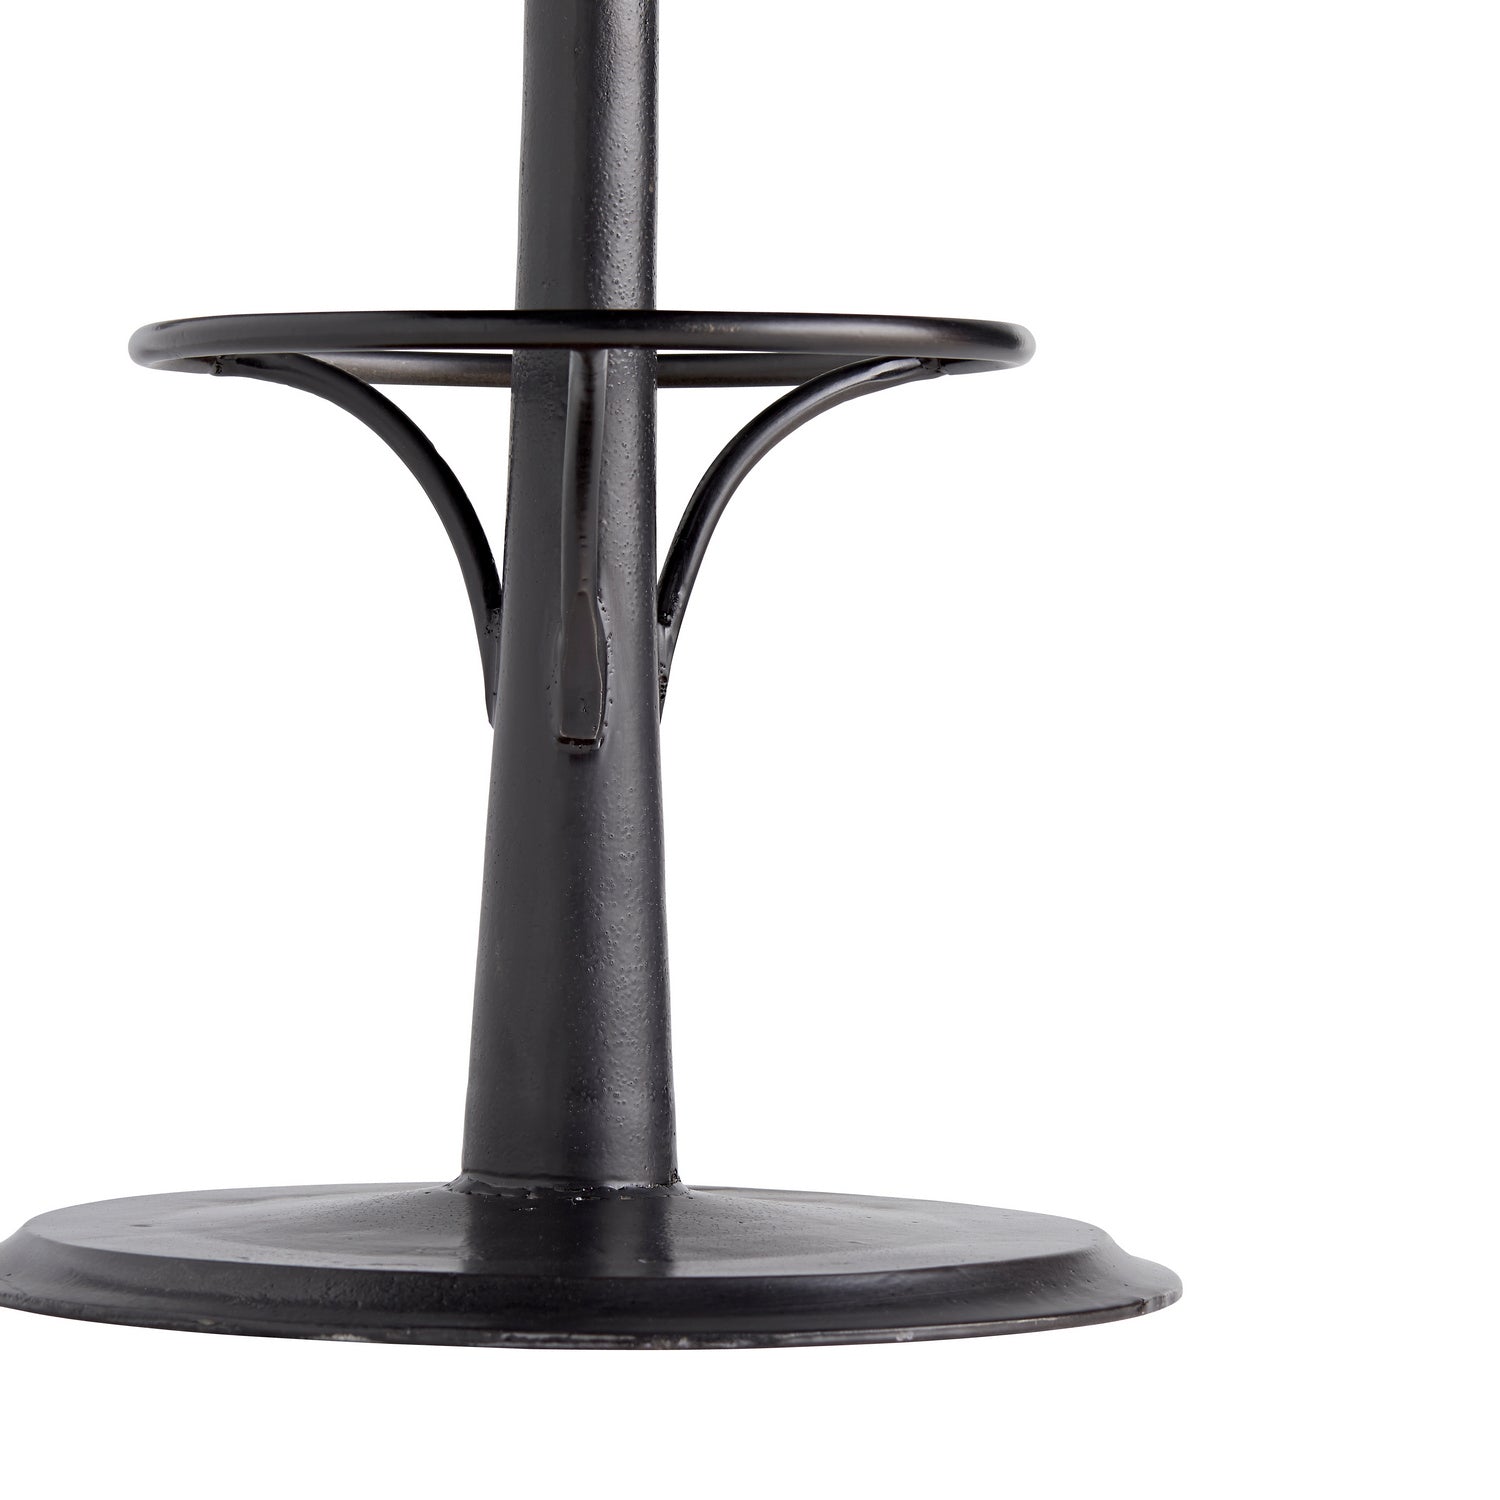 Bar Stool from the Holden collection in Graphite finish